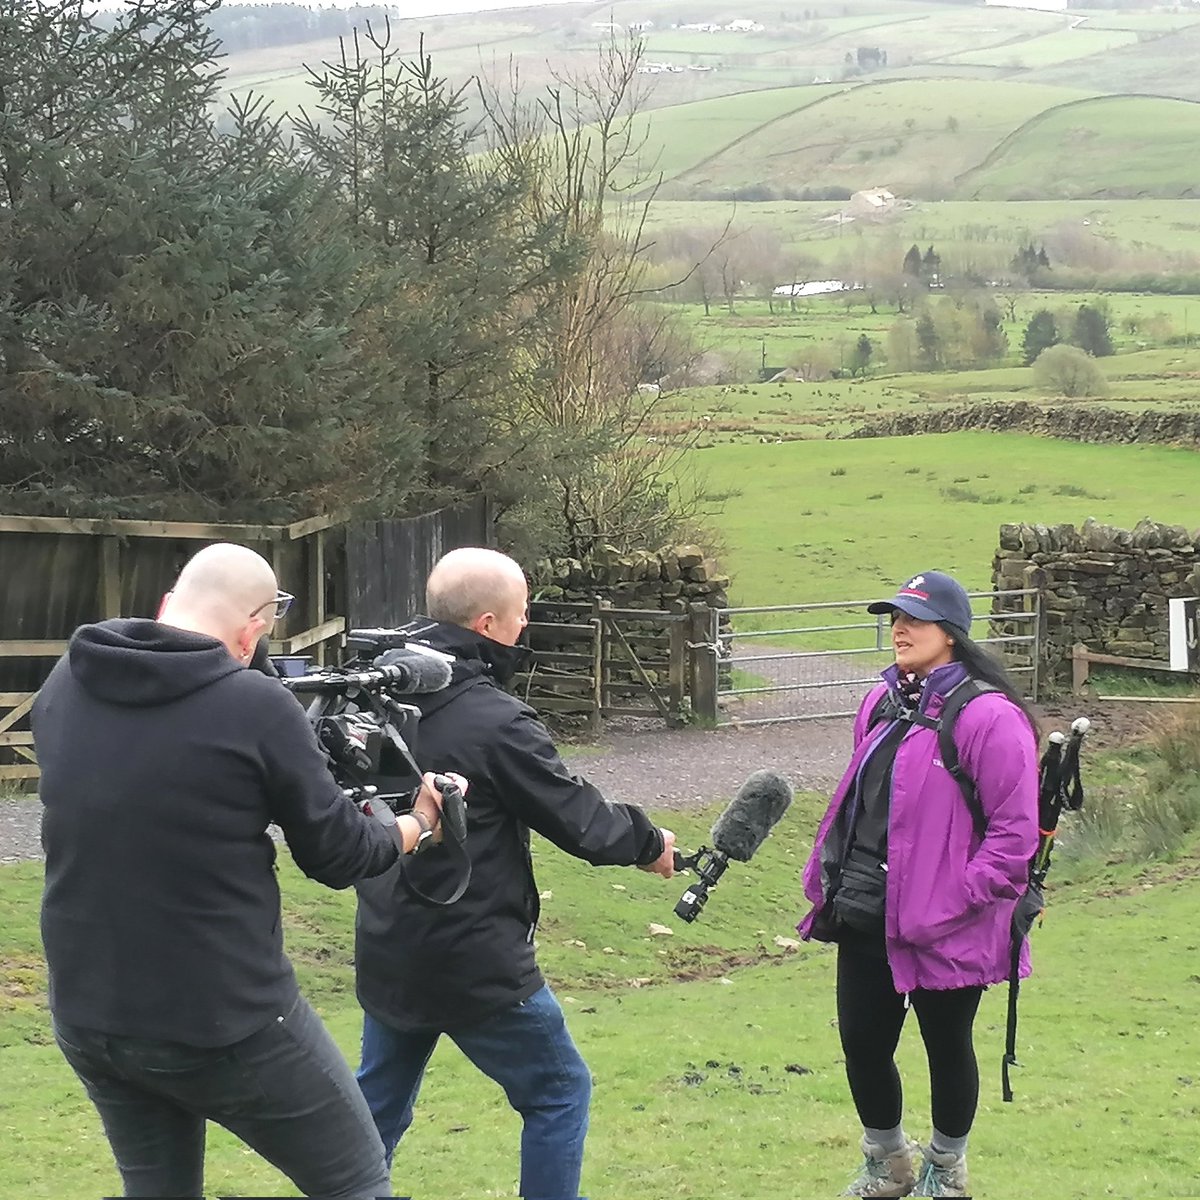 'Big thanks to our incredible volunteers for their unwavering support! Special shoutout to Shima for her fantastic interview for our upcoming female-only exclusive challenge. @BBCLancsSport @richardaskam #VolunteerAppreciation #FemaleEmpowerment #ExclusiveChallenge